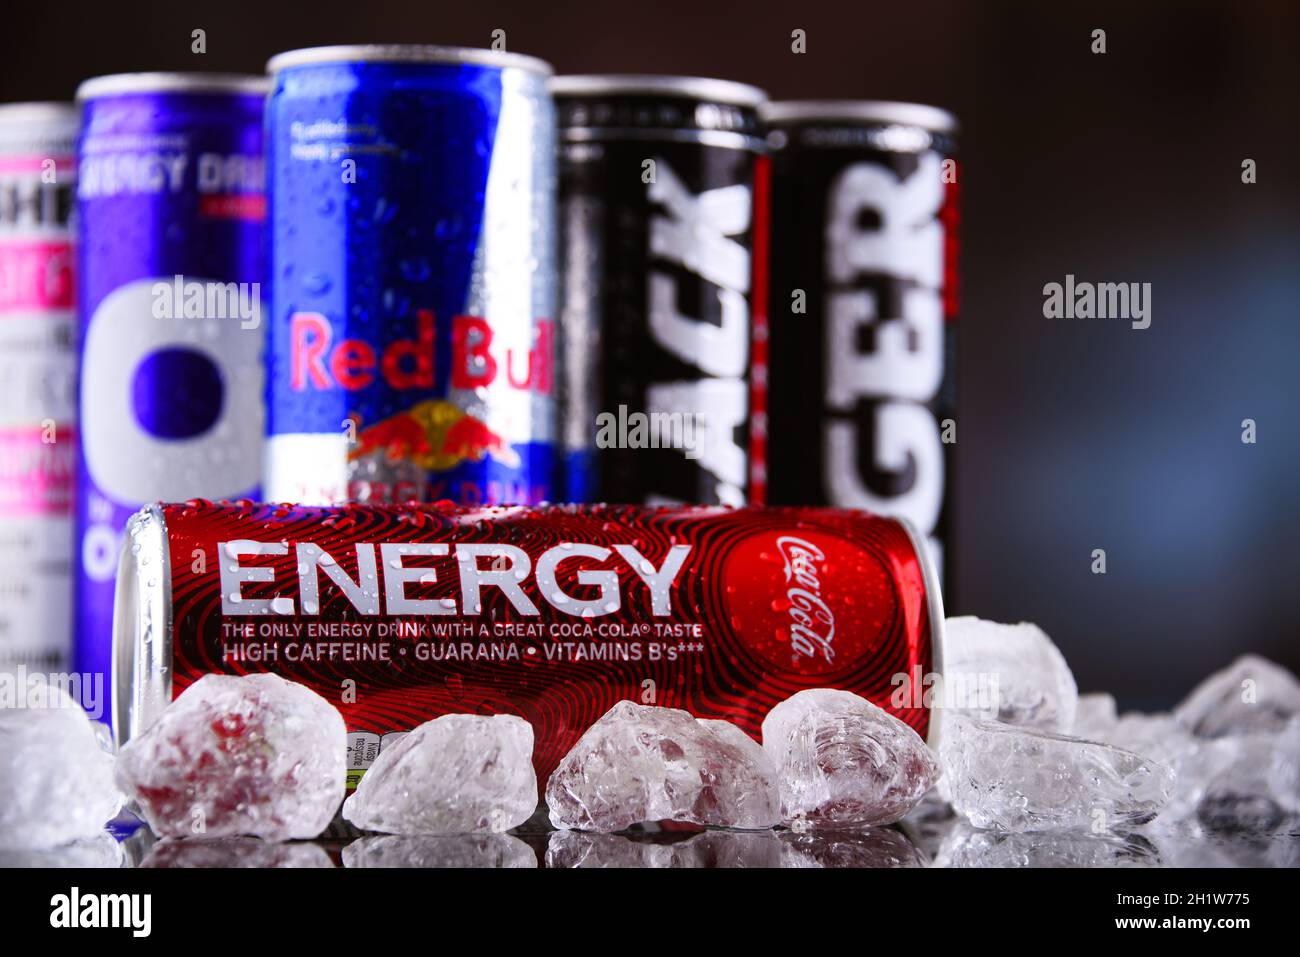 POZNAN, POLAND - MAY 13, 2021: Cans of popular global energy drinks, beverages containing stimulant drugs and marketed as providing mental and physica Stock Photo